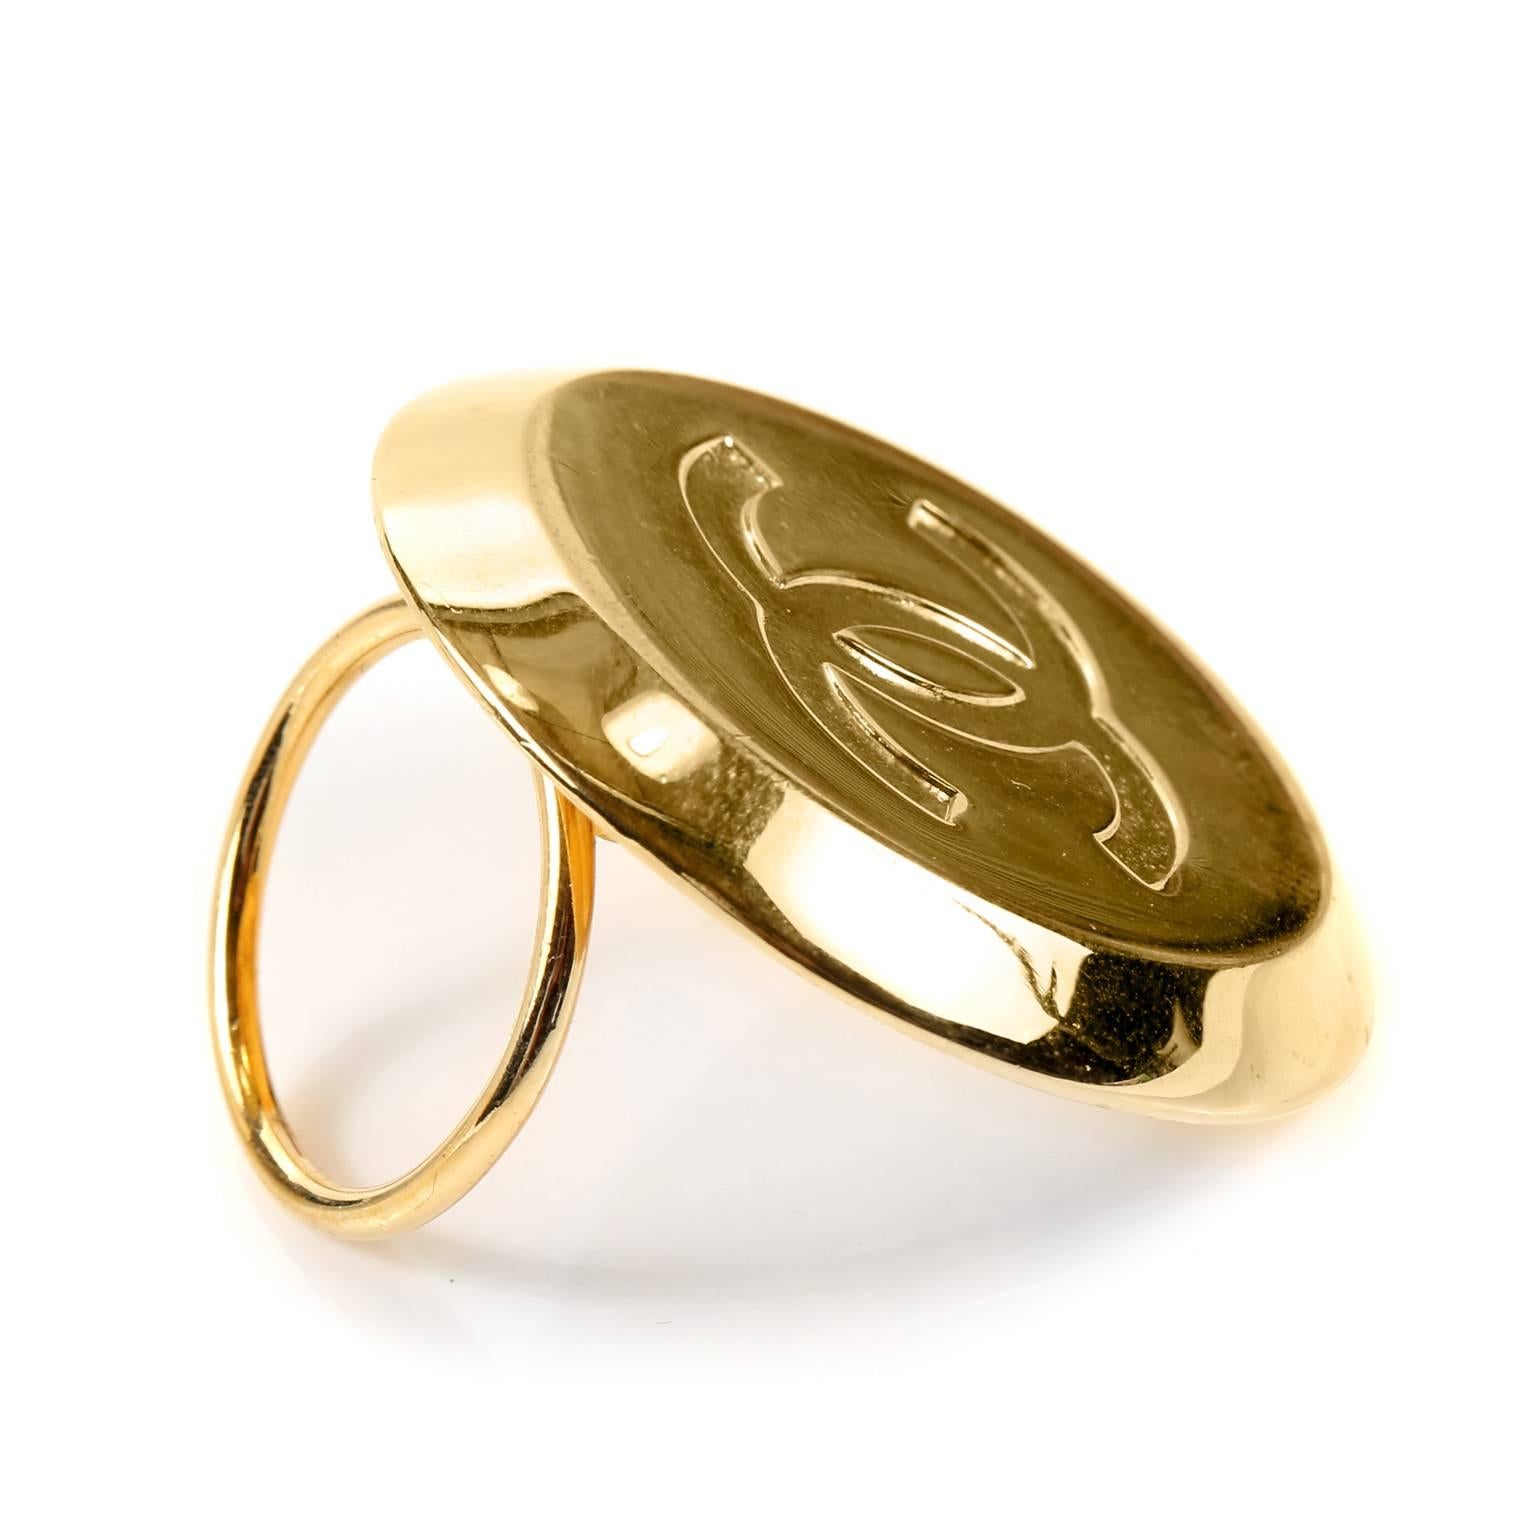 This authentic Chanel Gold CC Scarf Clip is in excellent vintage condition.  A must have for the collector, it elevates the scarf to a whole new level. 
Circular gold scarf ring with raised interlocking CC.  Hinged loop back. 
A227
